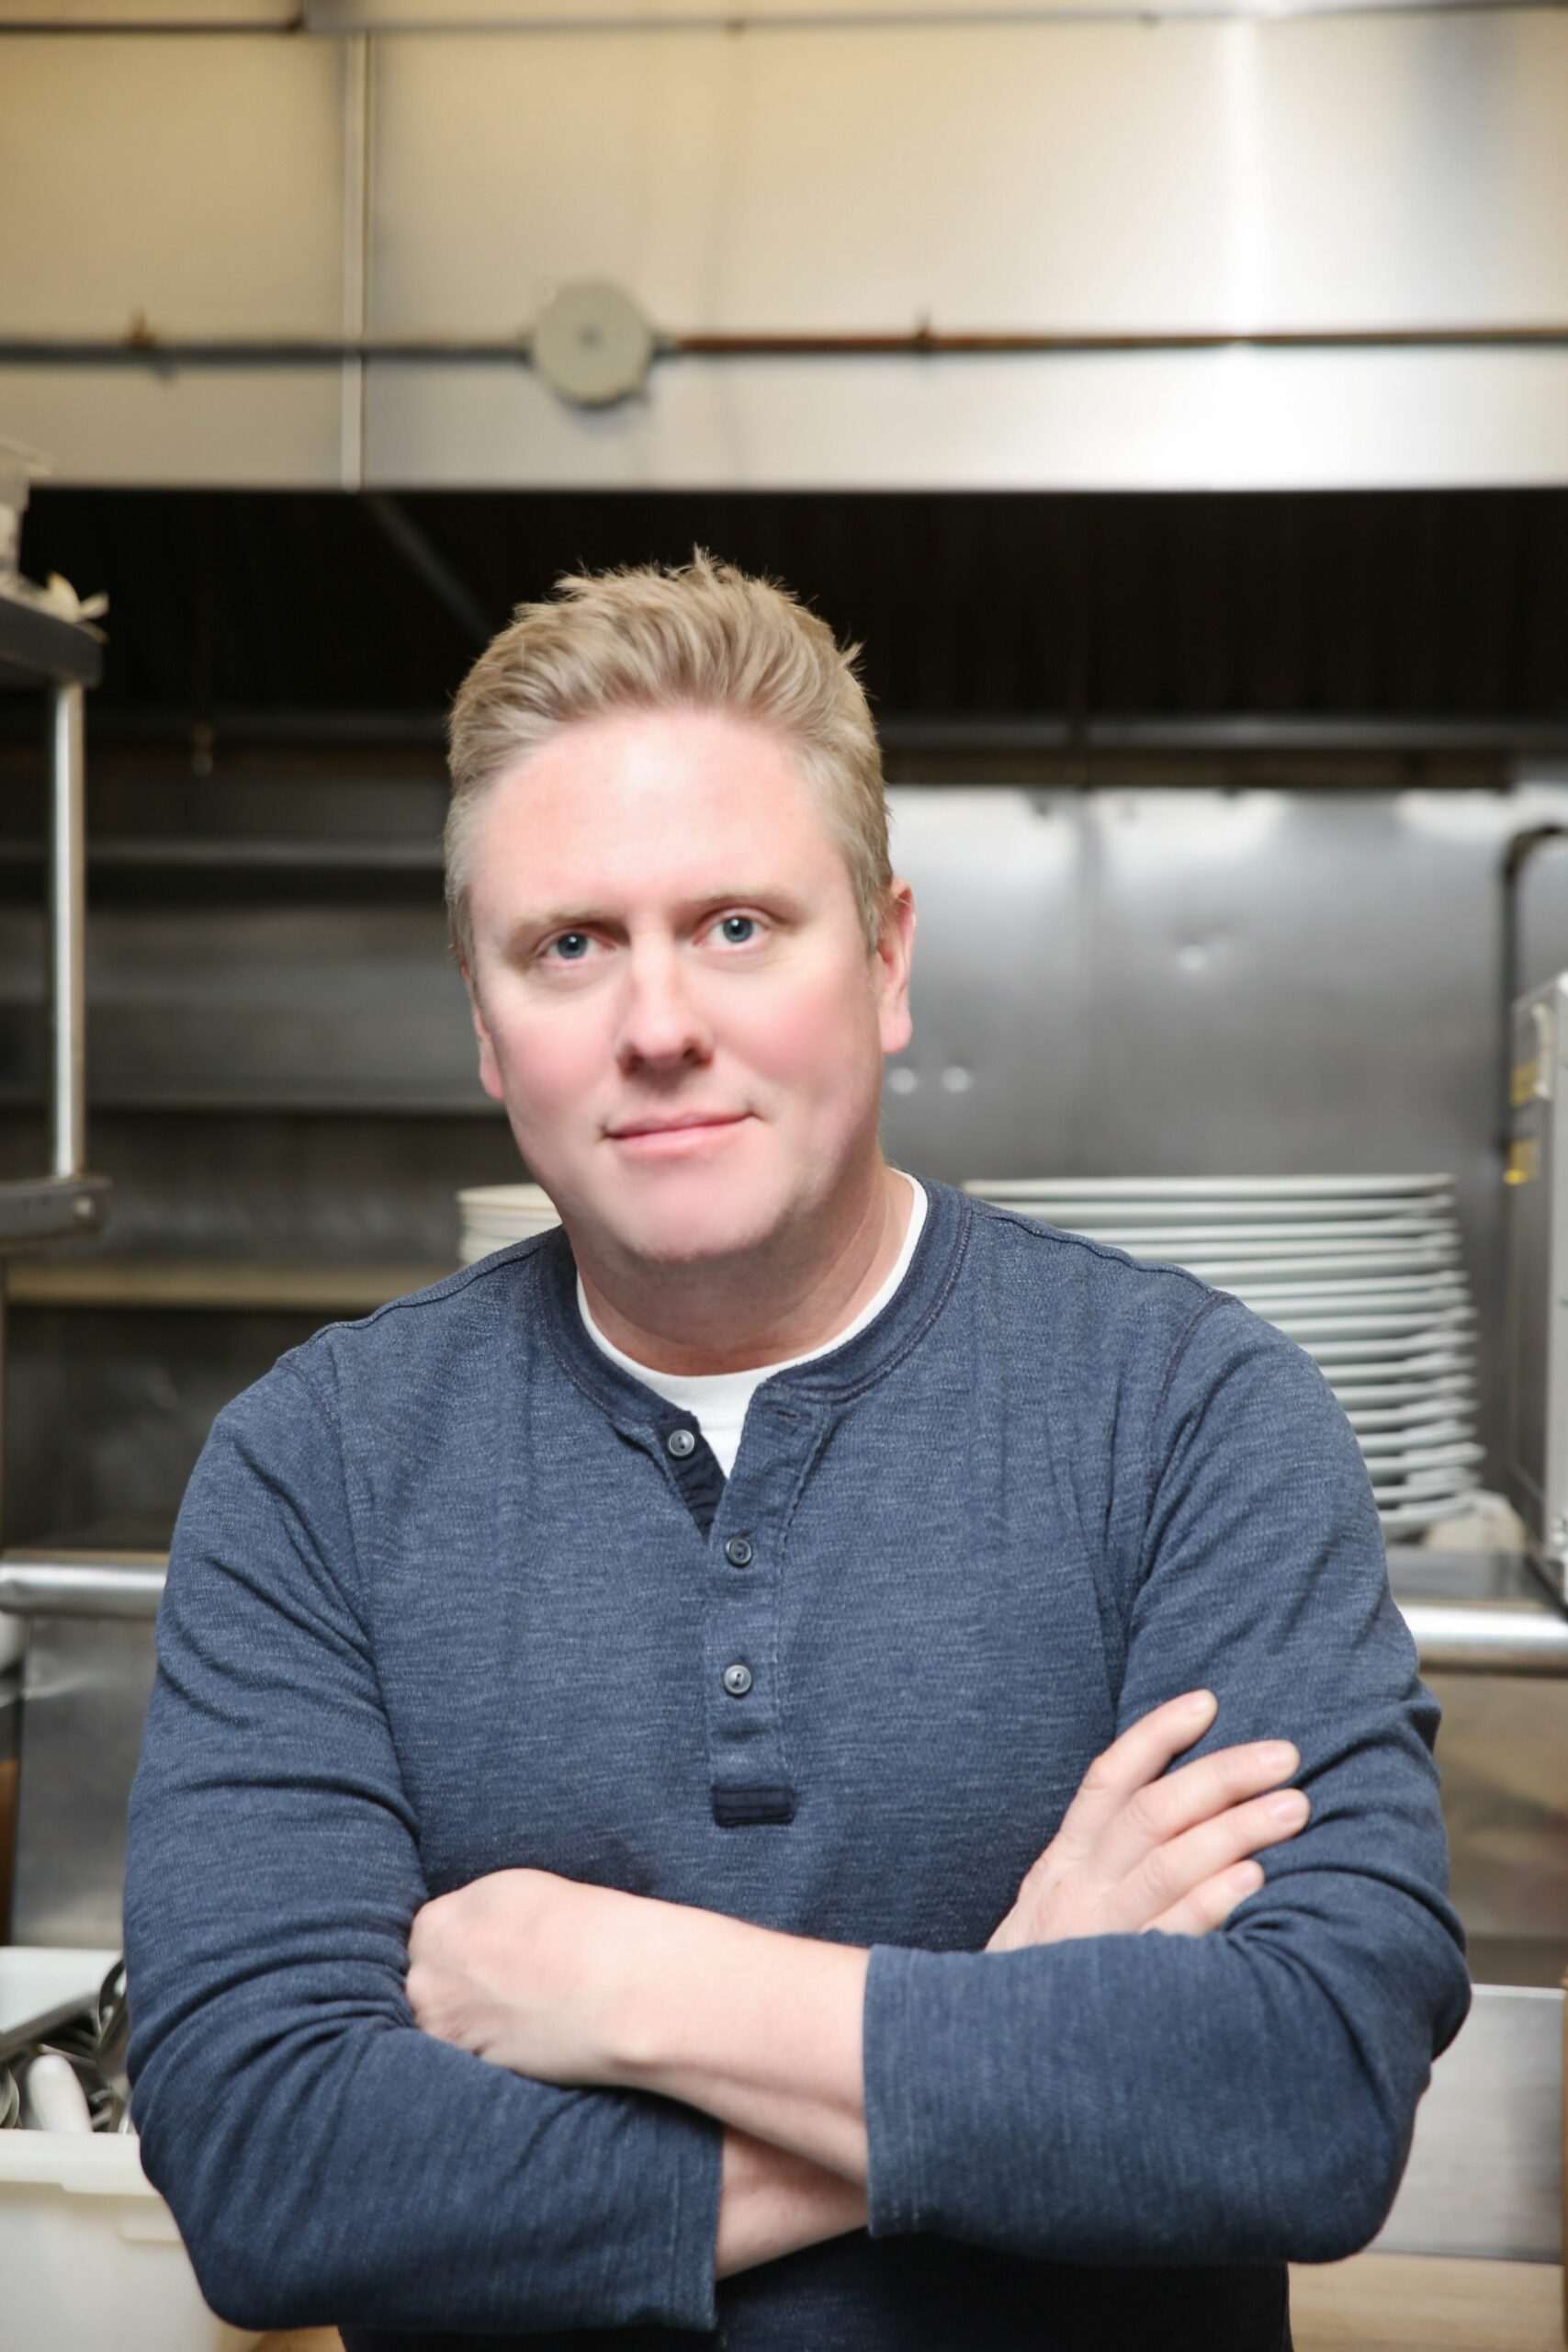 The former Harbor Bistro's owner, Damien O'Donnell, is the new chef at Bostwick's on the Harbor. COURTESY BOSTWICK'S ON THE HARBOR